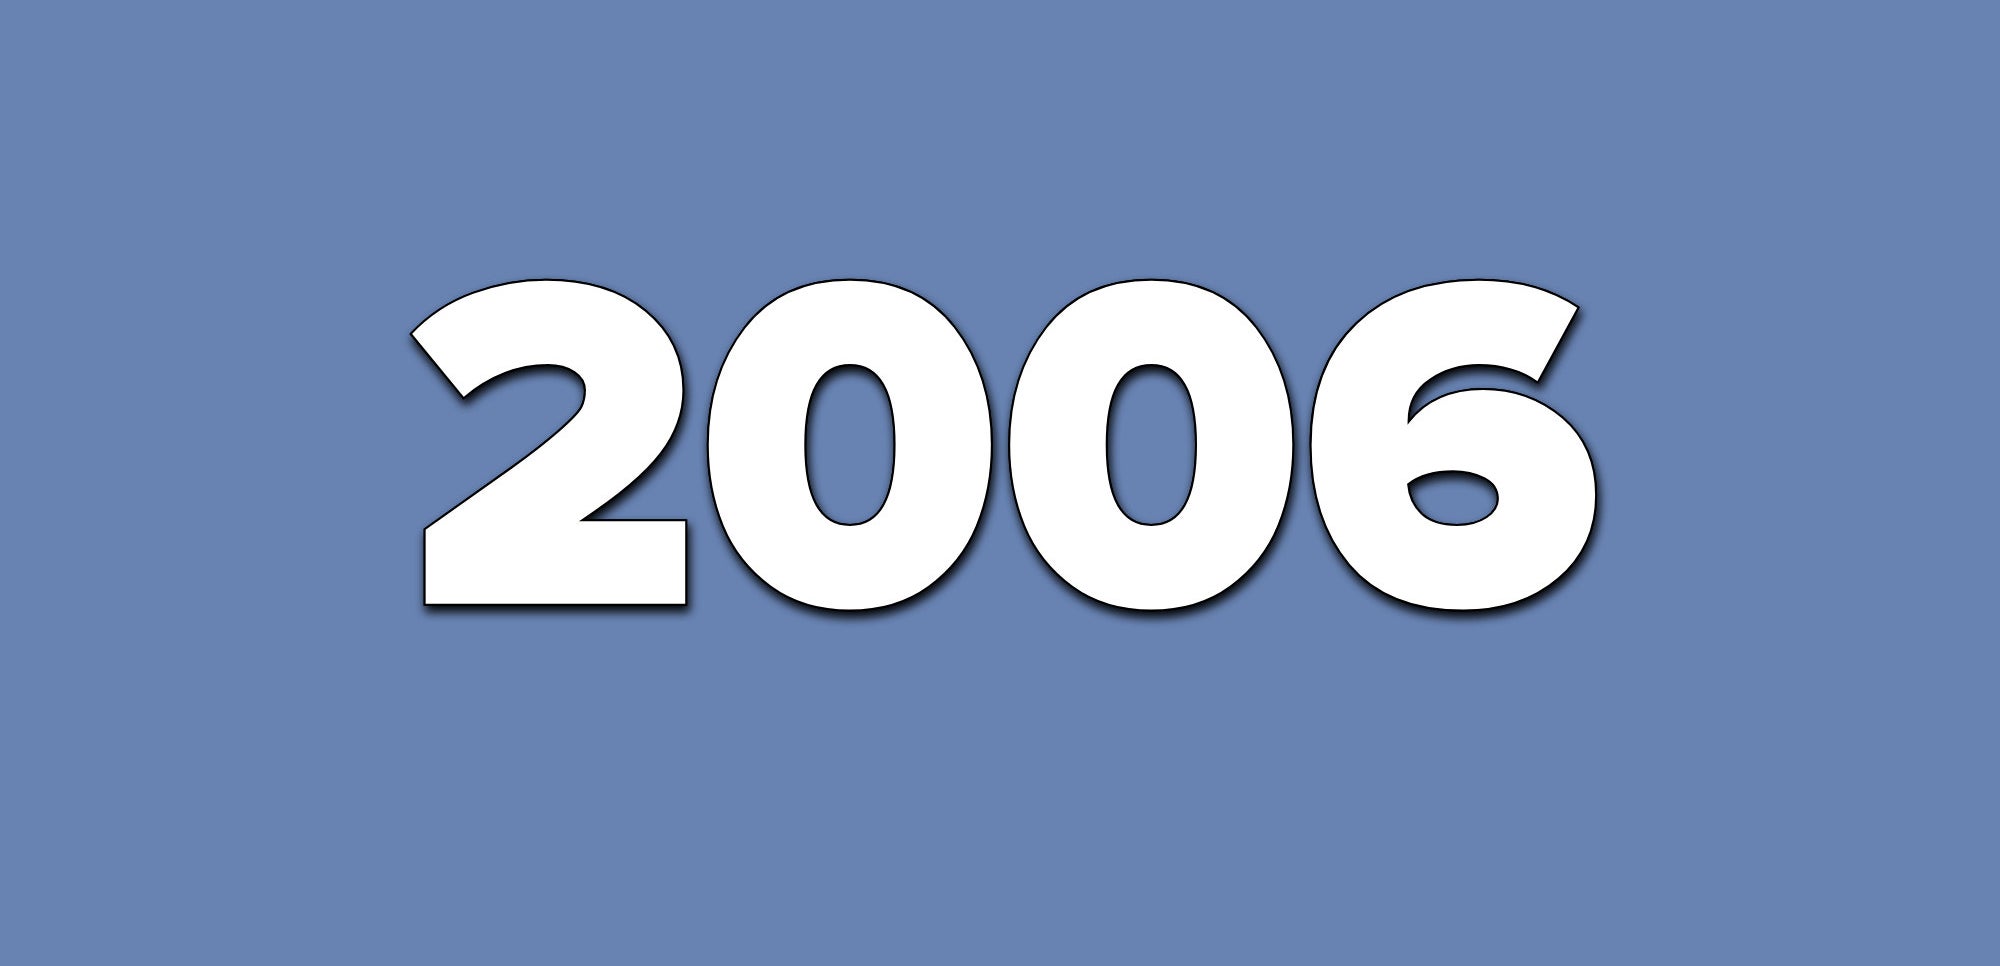 A blue background with text that says 2006